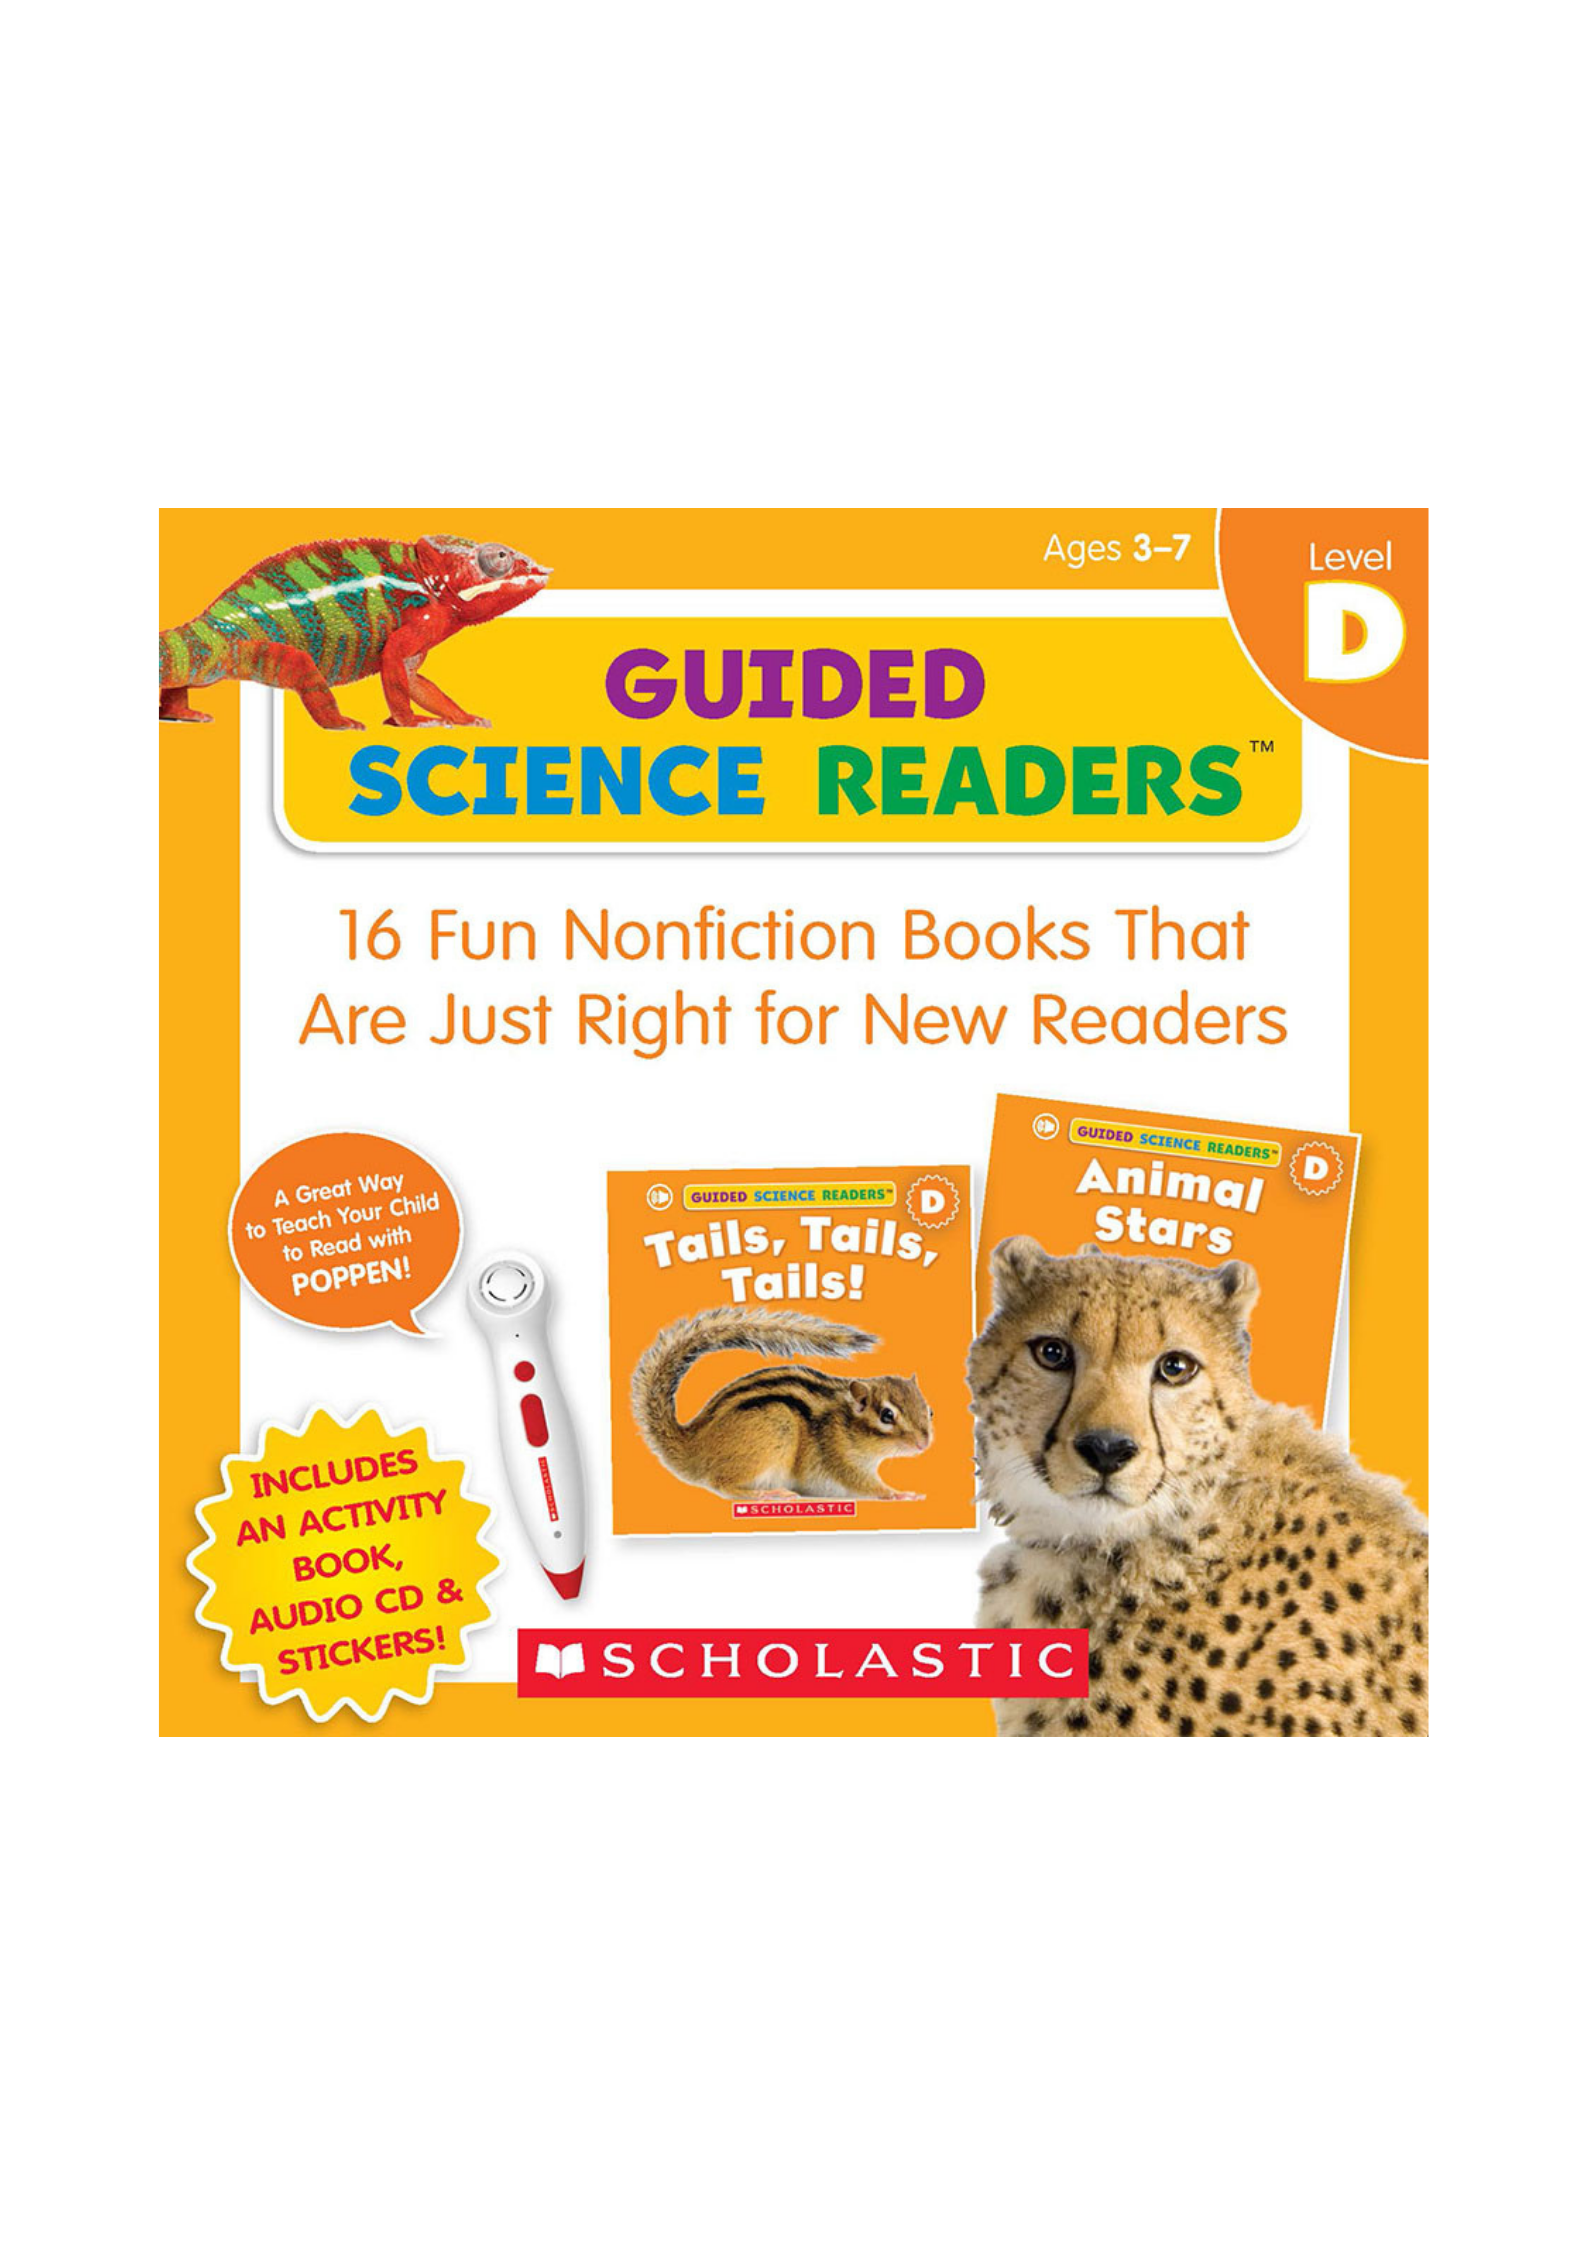 Guided Science Readers Level D